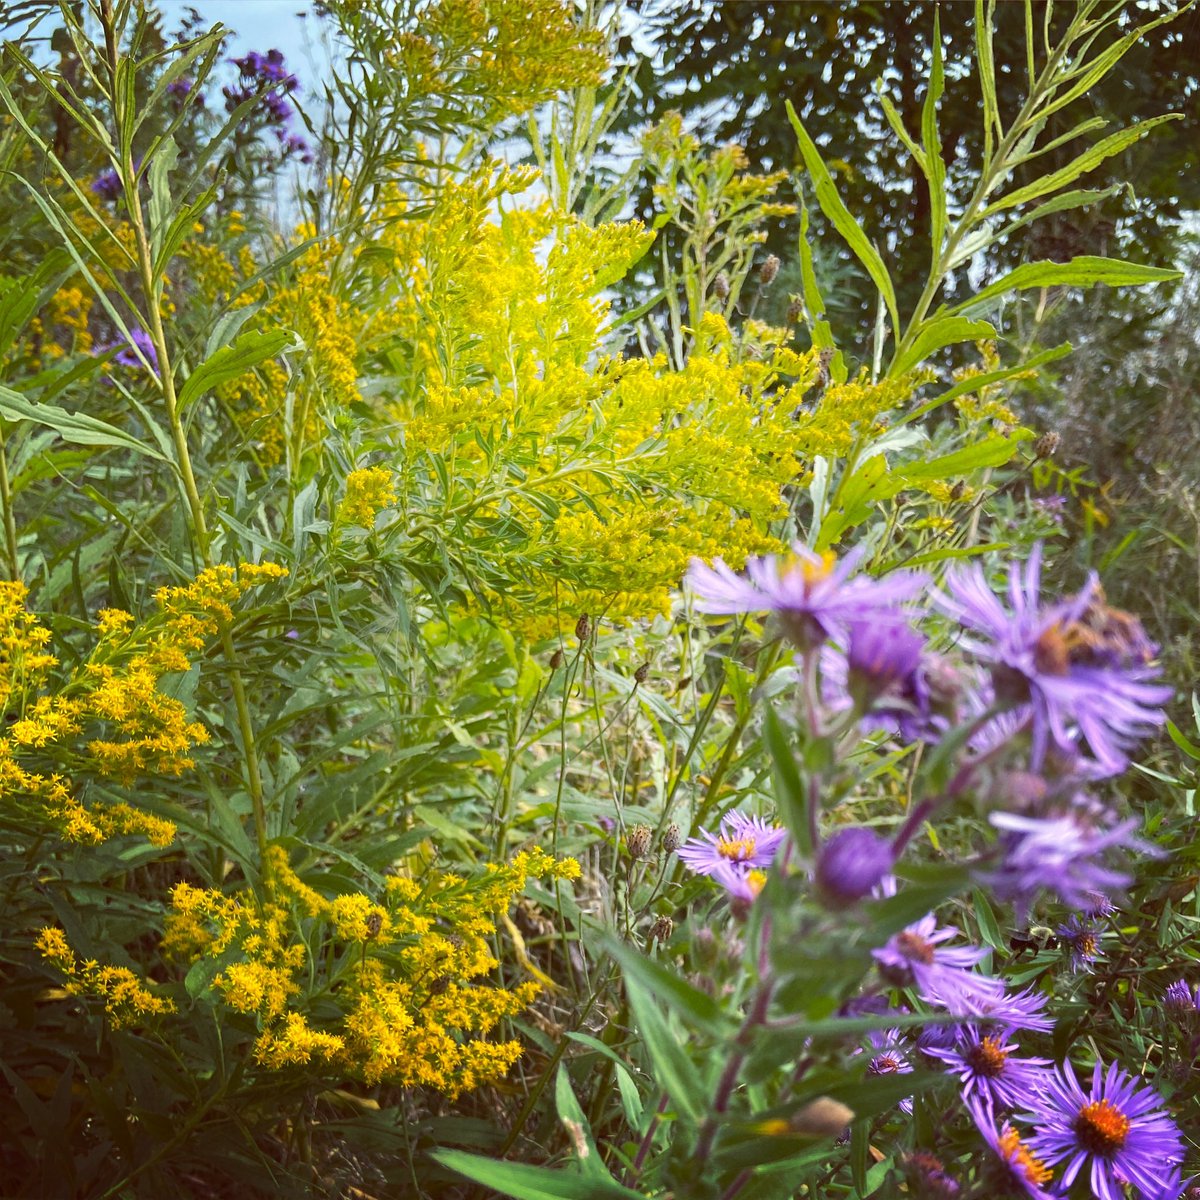 Golden rod and New England aster grow together as it’s assume they are able attract more pollinators with the contrasting colour display of flowers. 

How might the outdoors inspire an inquiry?
#tdsbGC